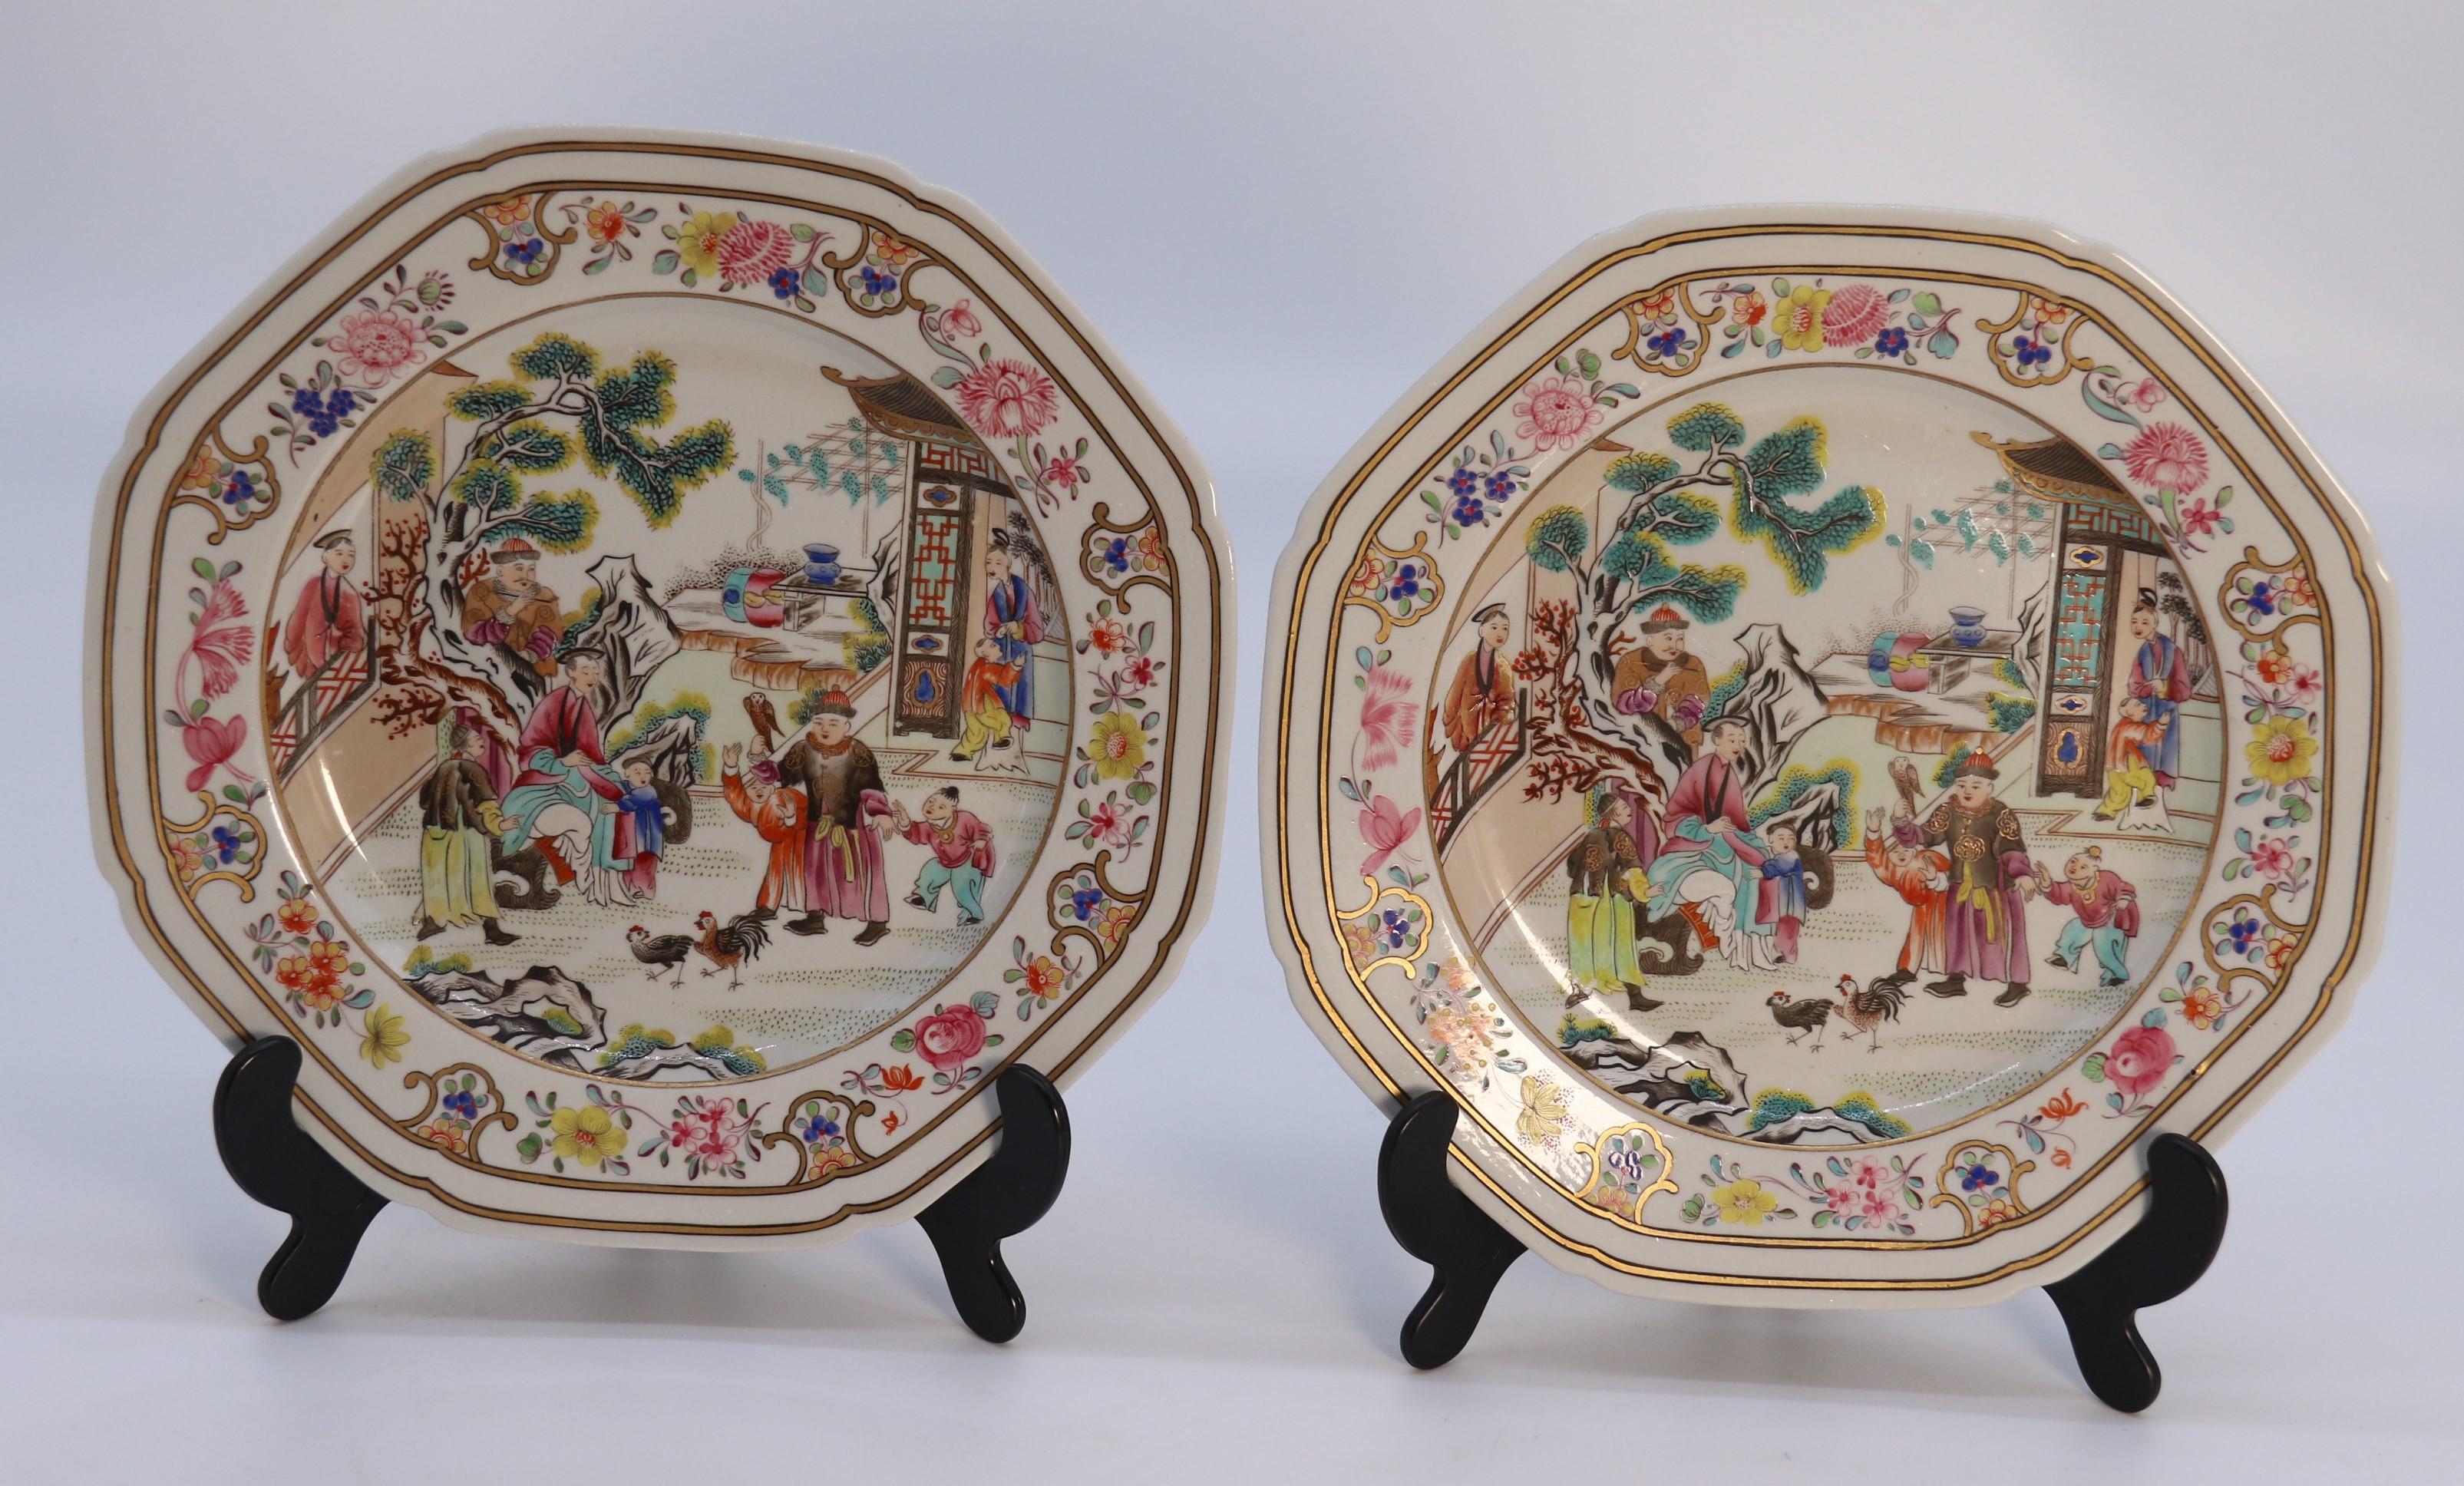 This truly beautiful pair of exceptional quality early 19th century Spode stone china octagonal shaped cabinet plates are hand painted with Chinese chinoiserie scenes of a highly detailed design in rich bright coloured enamels with fine gilded